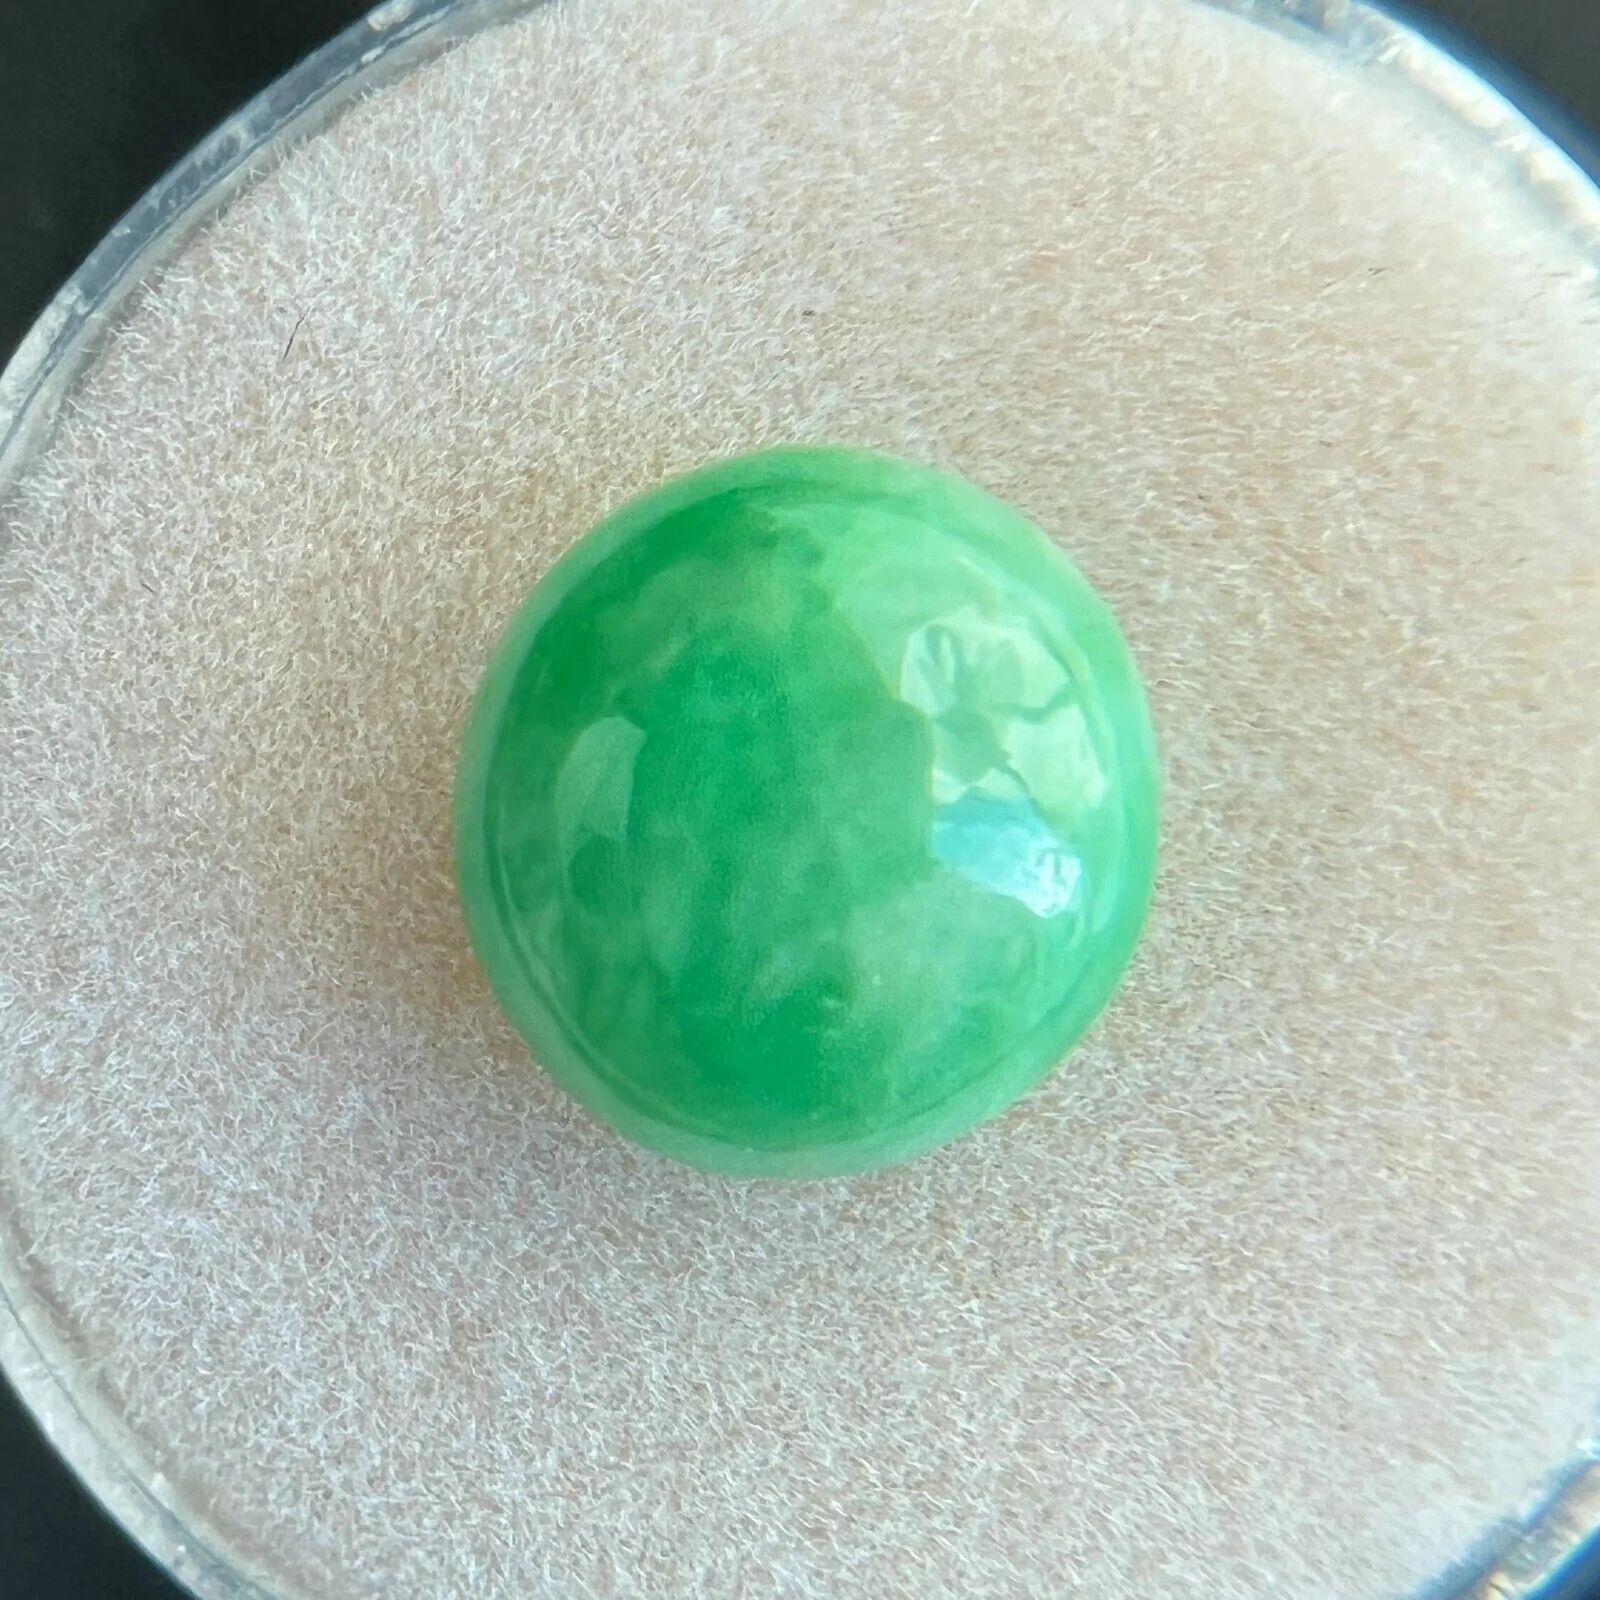 Rare 4.28ct IGI Certified Green Jadeite Jade ‘A’ Grade Oval Cabochon Loose Gem

IGI Certified Untreated A Grade GreenJadeite Gemstone.
4.28 Carat with an excellent oval cabochon cut and bright green colour. Fully certified by IGI in Antwerp, one of